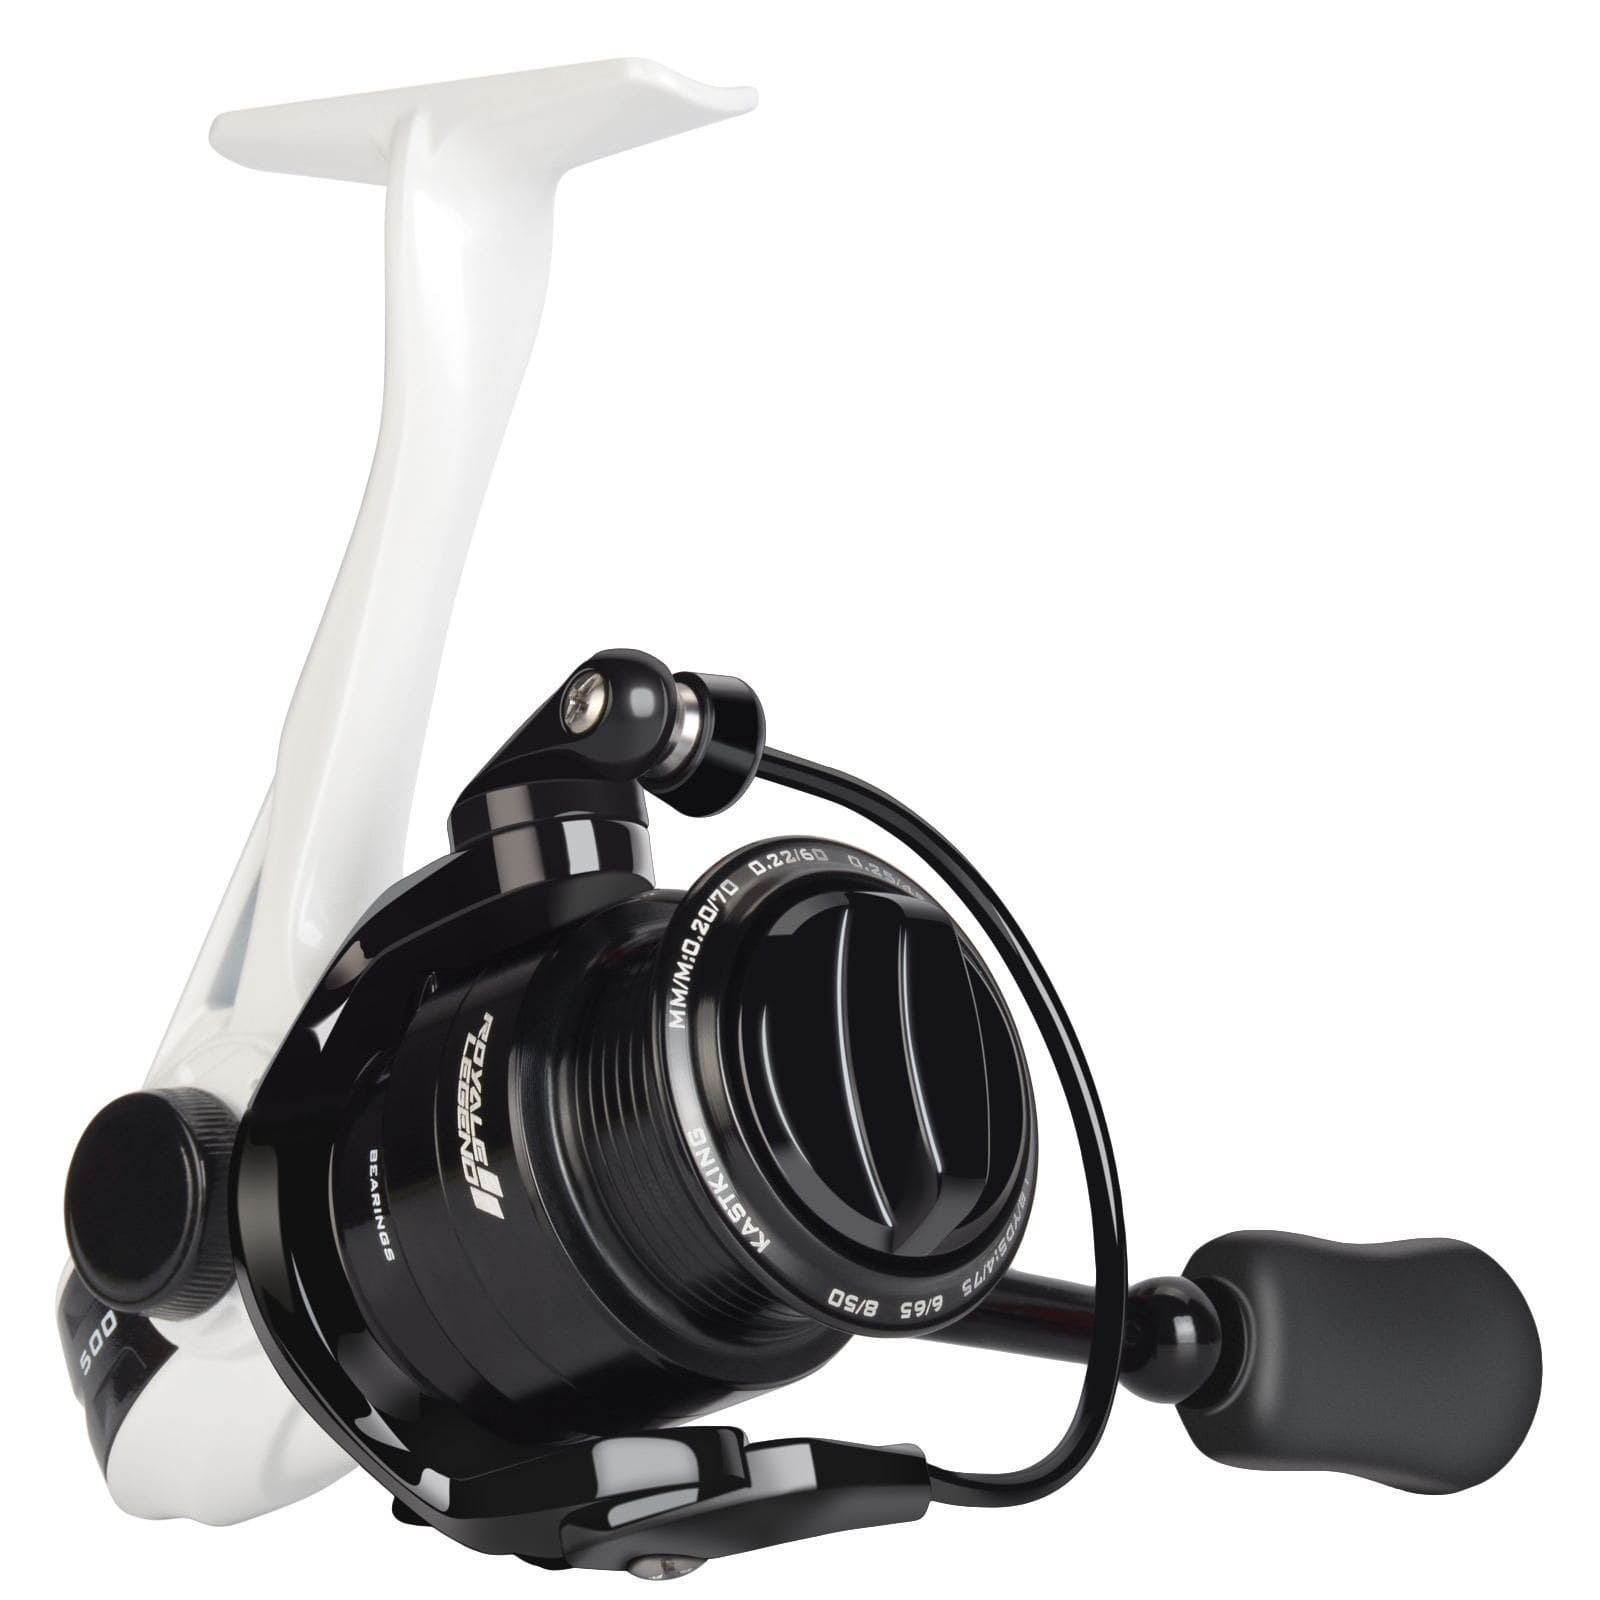  Fishing Reel 2+ 1BB Lightweight Ultra Smooth Aluminum Spinning  Fishing Reel Freshwater and Salt Water Baitcasting Reel is perfect for  ultralight/ice fishing,DS5000 : Sports & Outdoors